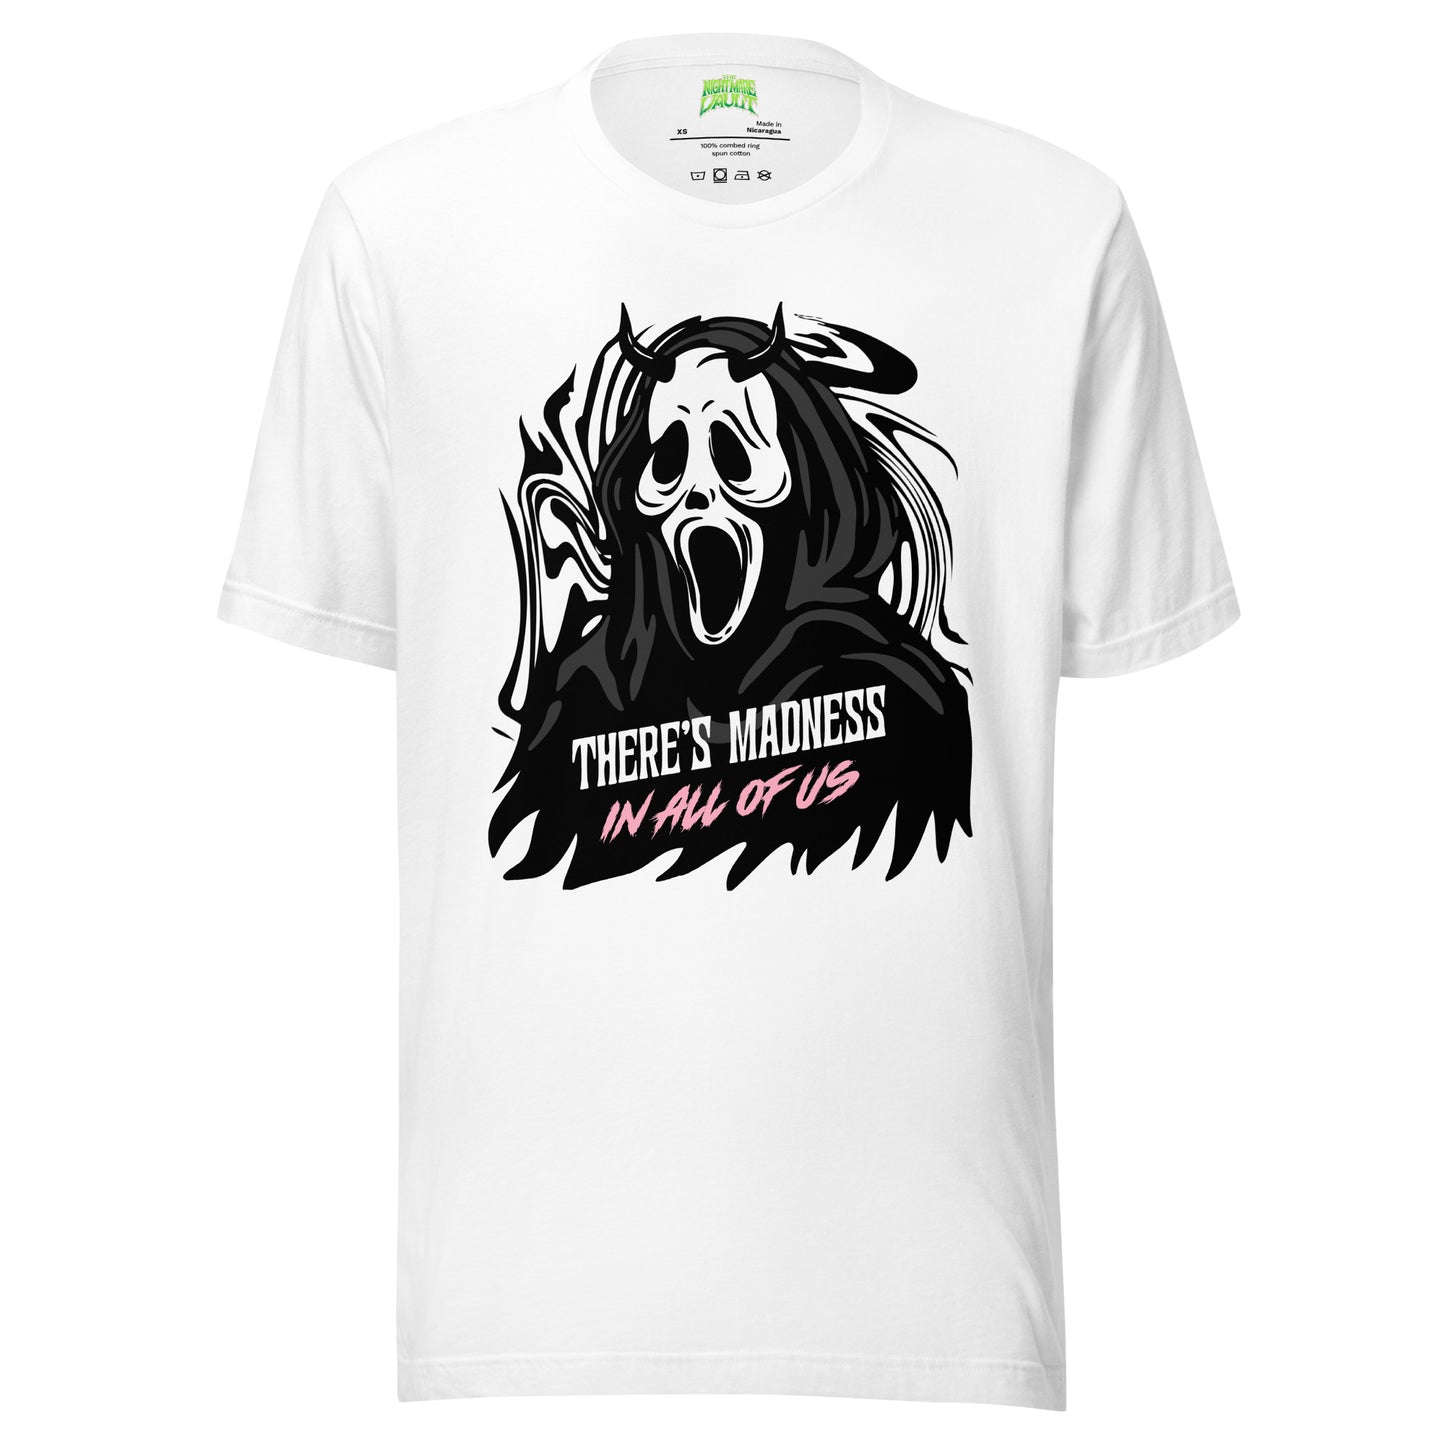 There's Madness in All of Us tee